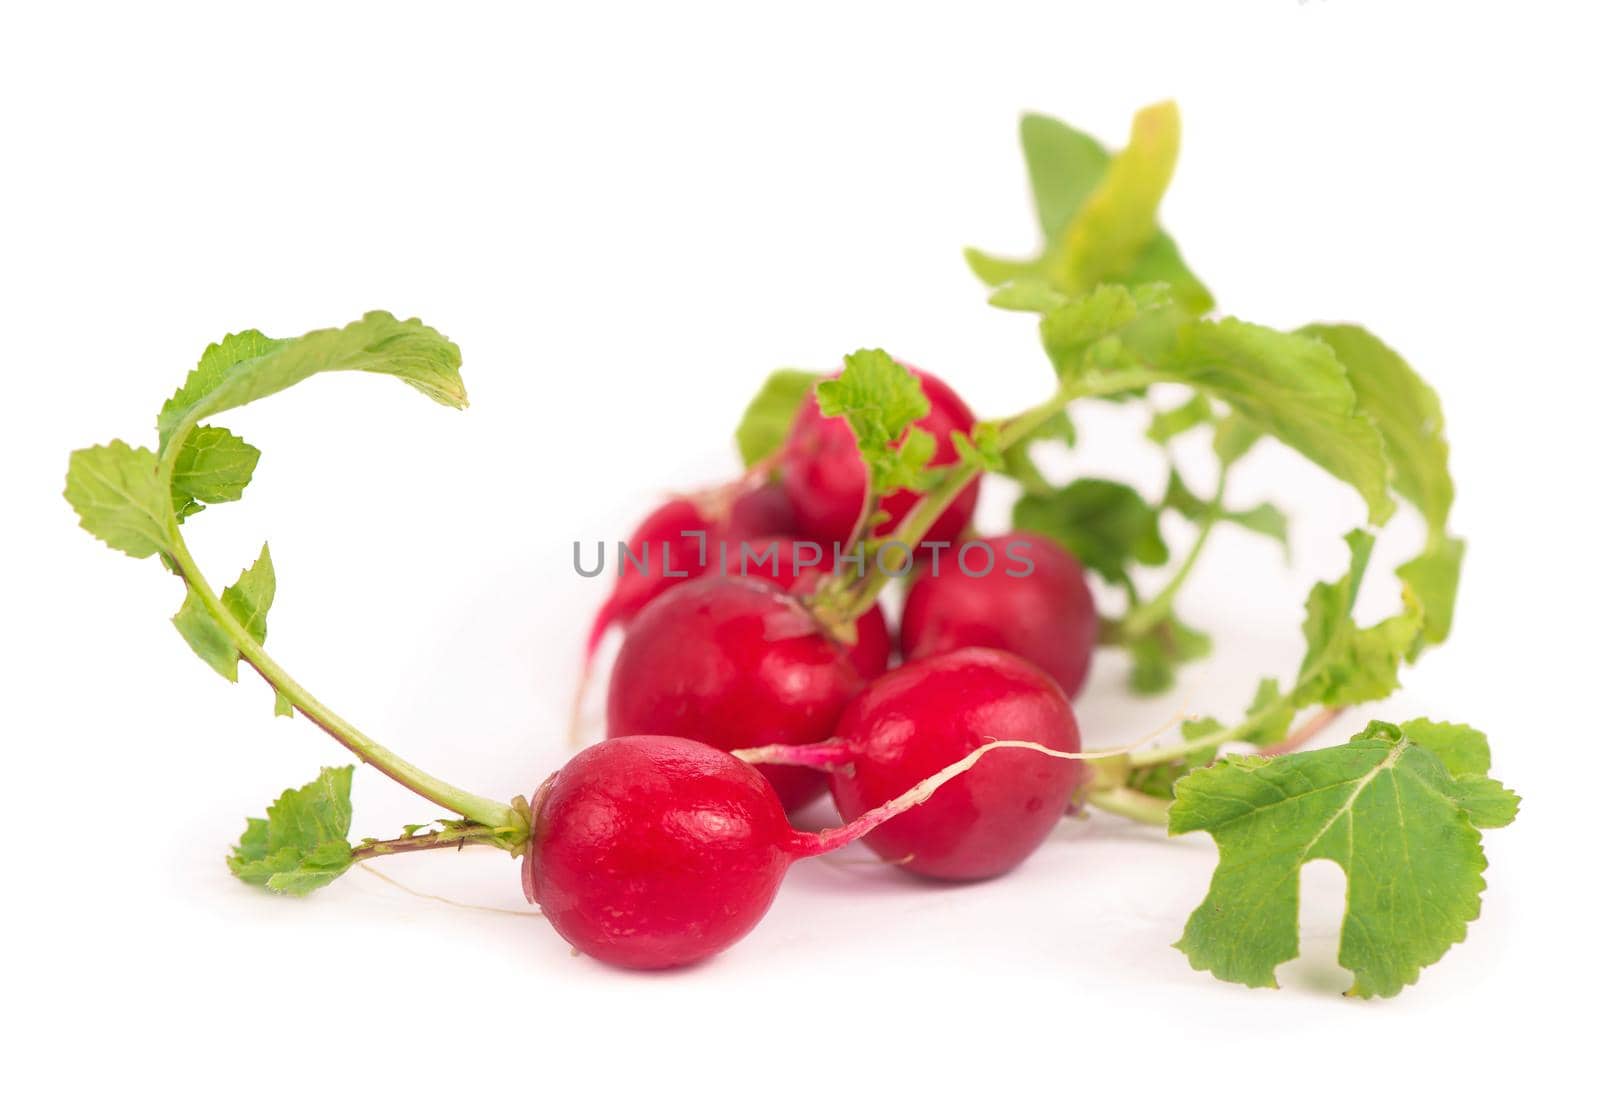 Radis bunch isolated on white background. Fresh radish root bundle, pile of red radishes with green leaves top view by aprilphoto